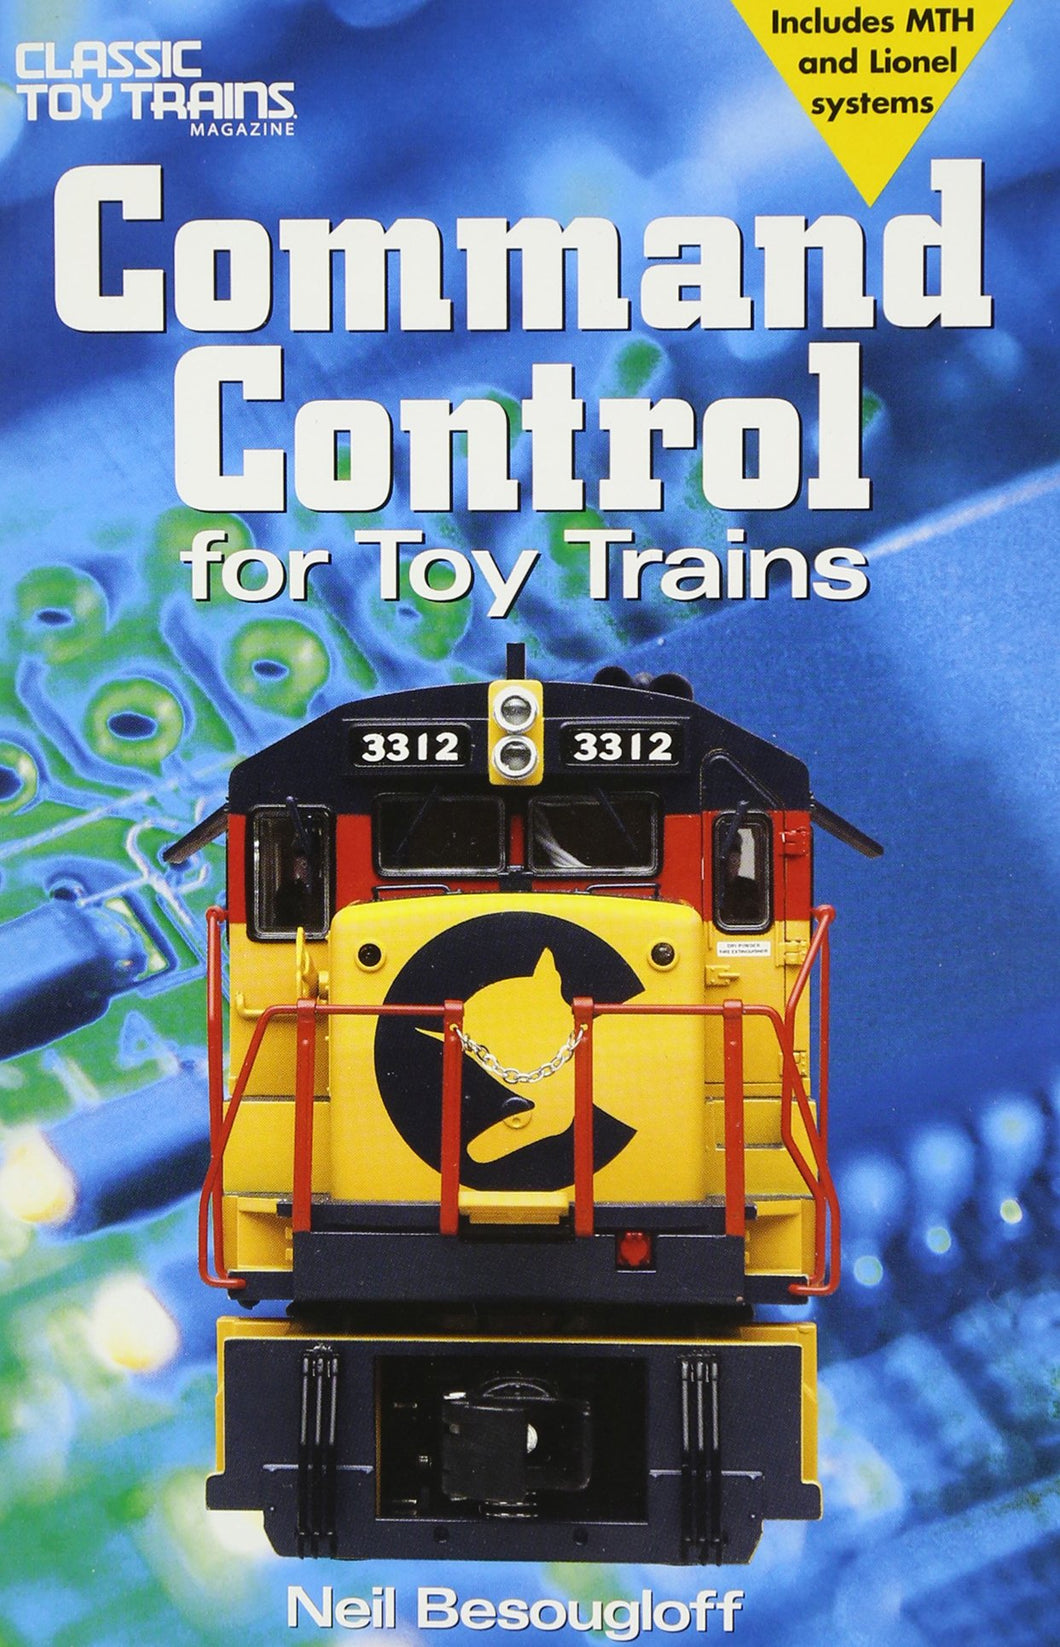 Command Control for Toy Trains 1st Ed Classic Toy Trains Books Lionel MTH